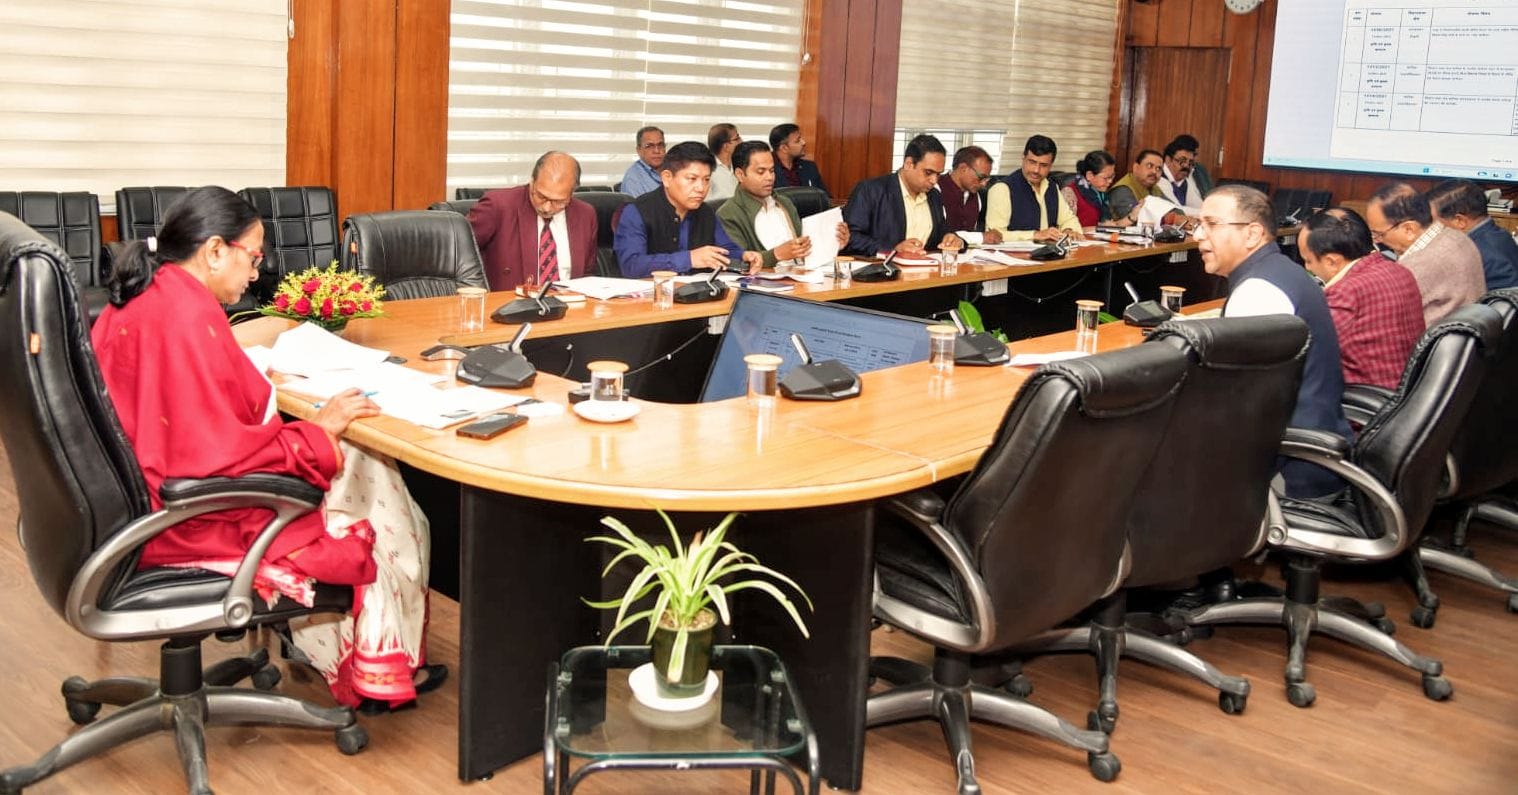 Additional Chief Secretary Radha Raturi reviewed the progress of the Chief Minister's announcements